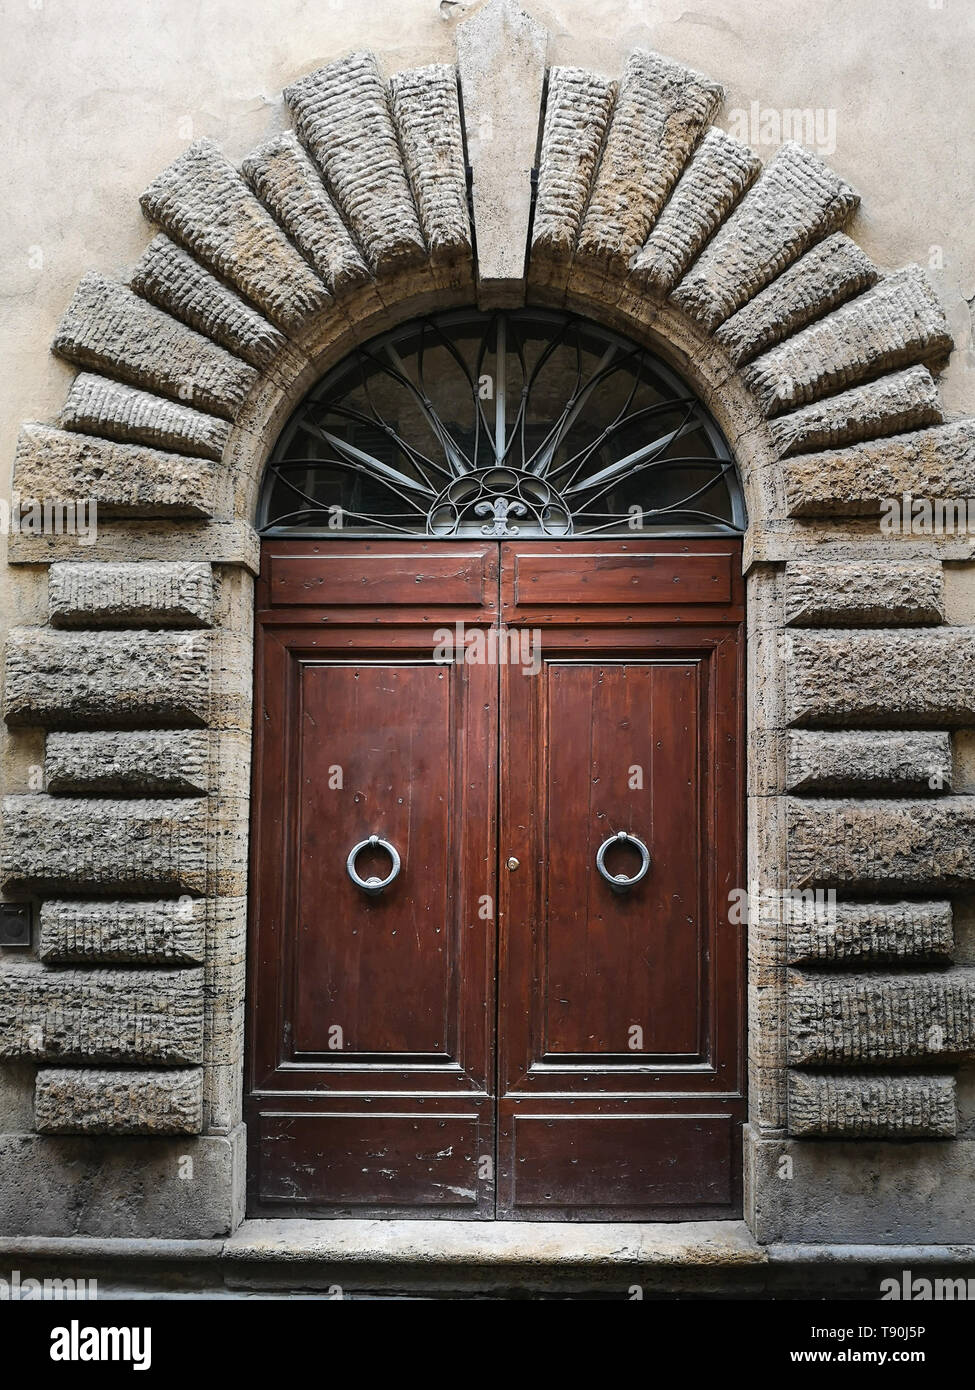 Ancient wooden portal with carved stone arch of an Italian medieval building. Stock Photo